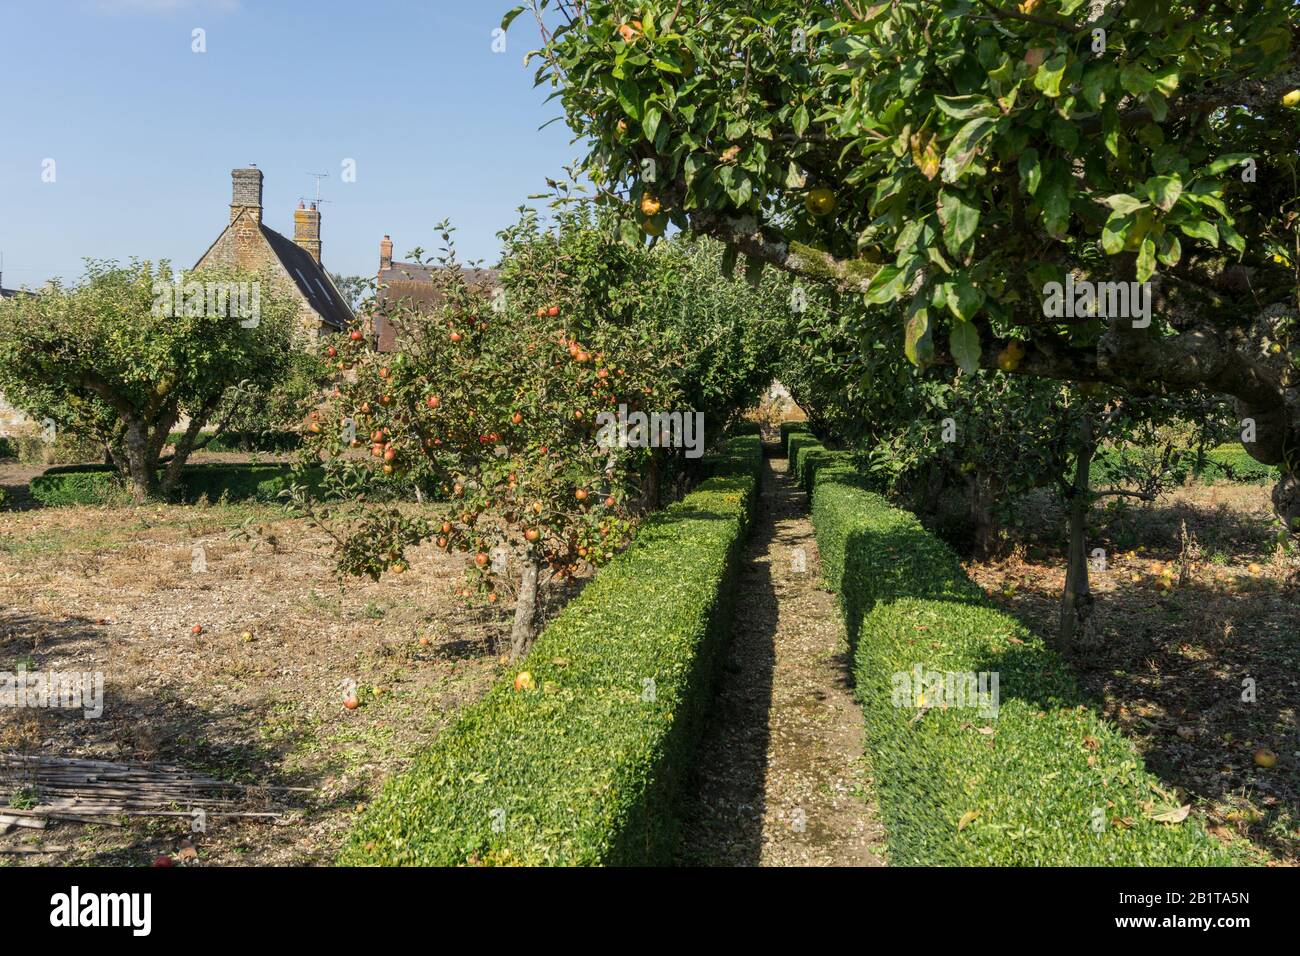 The orchard at Weston Hall, a late 17th century house and home to the famous literary Sitwell family since 1714; Weston, Northamptonshire, UK Stock Photo